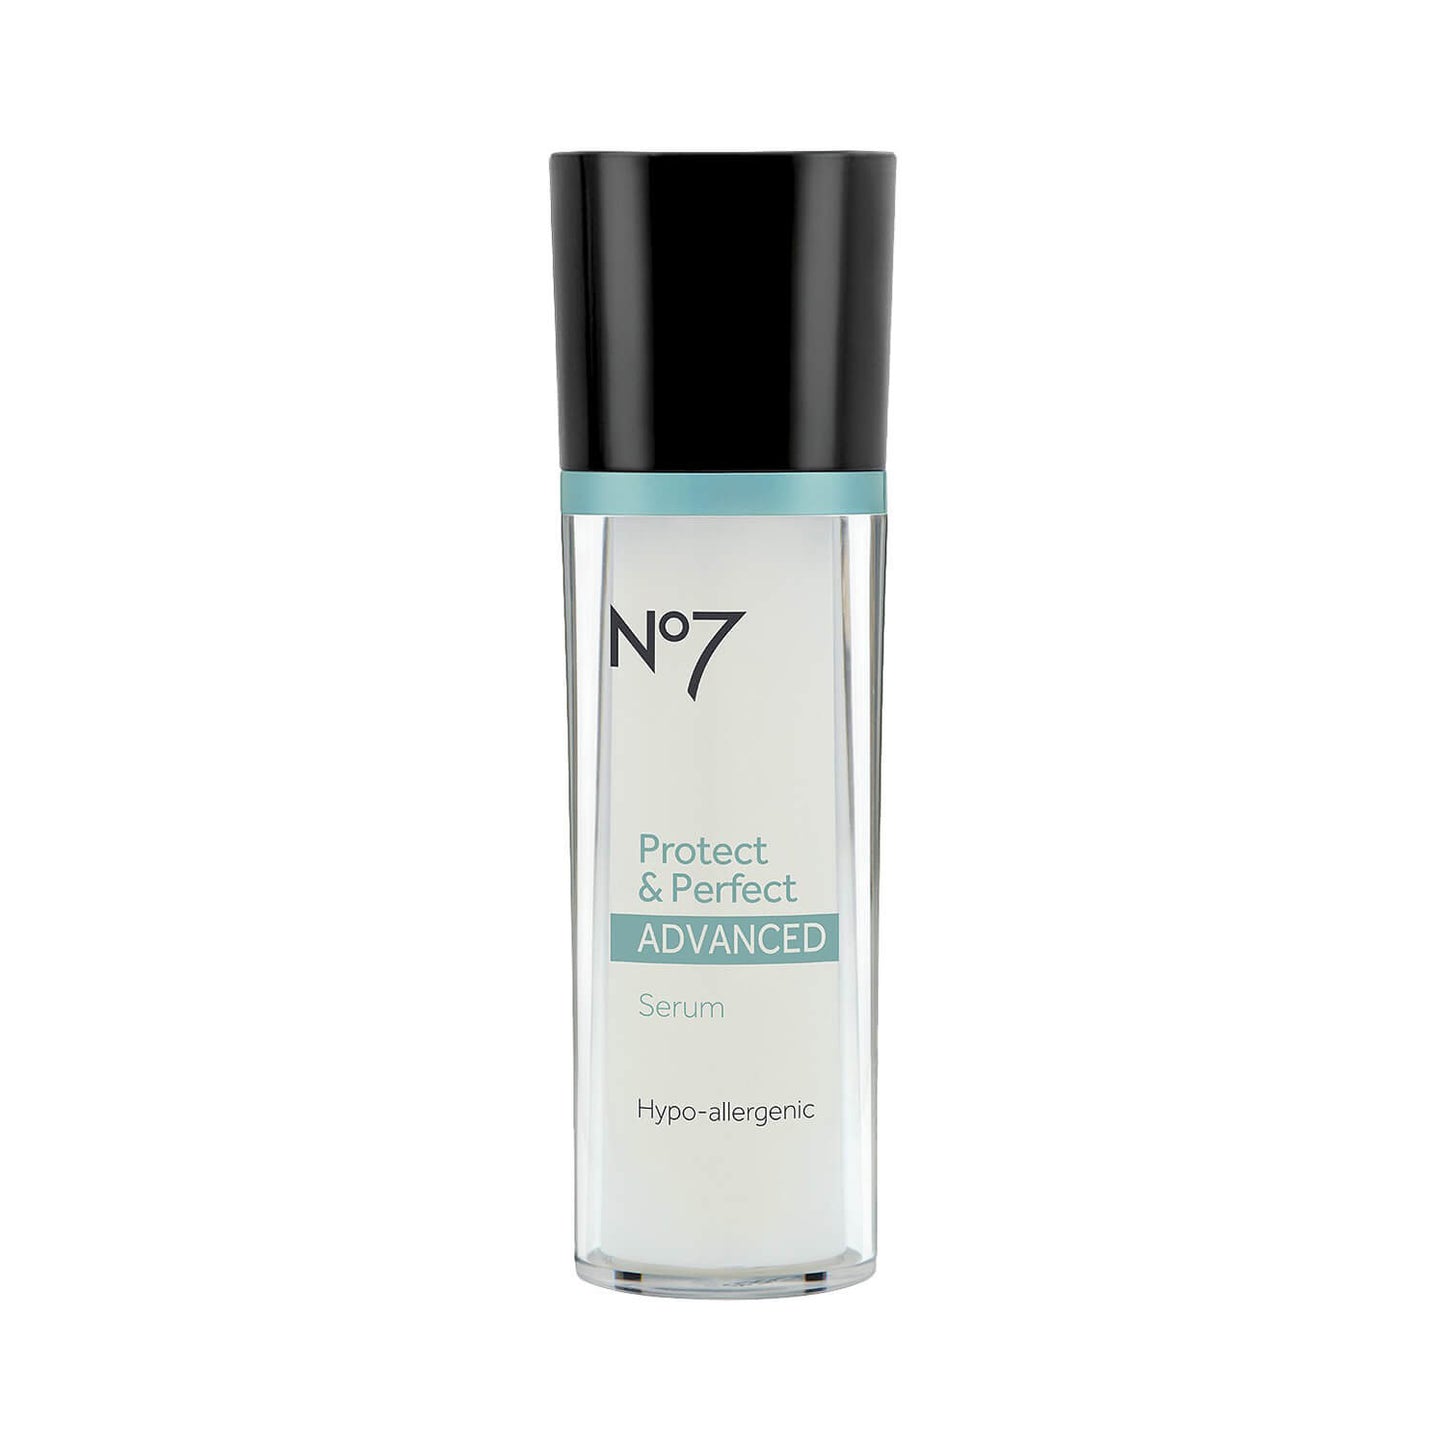 Boots No7 Protect & Perfect Advanced Anti Aging Serum Bottle 30ml